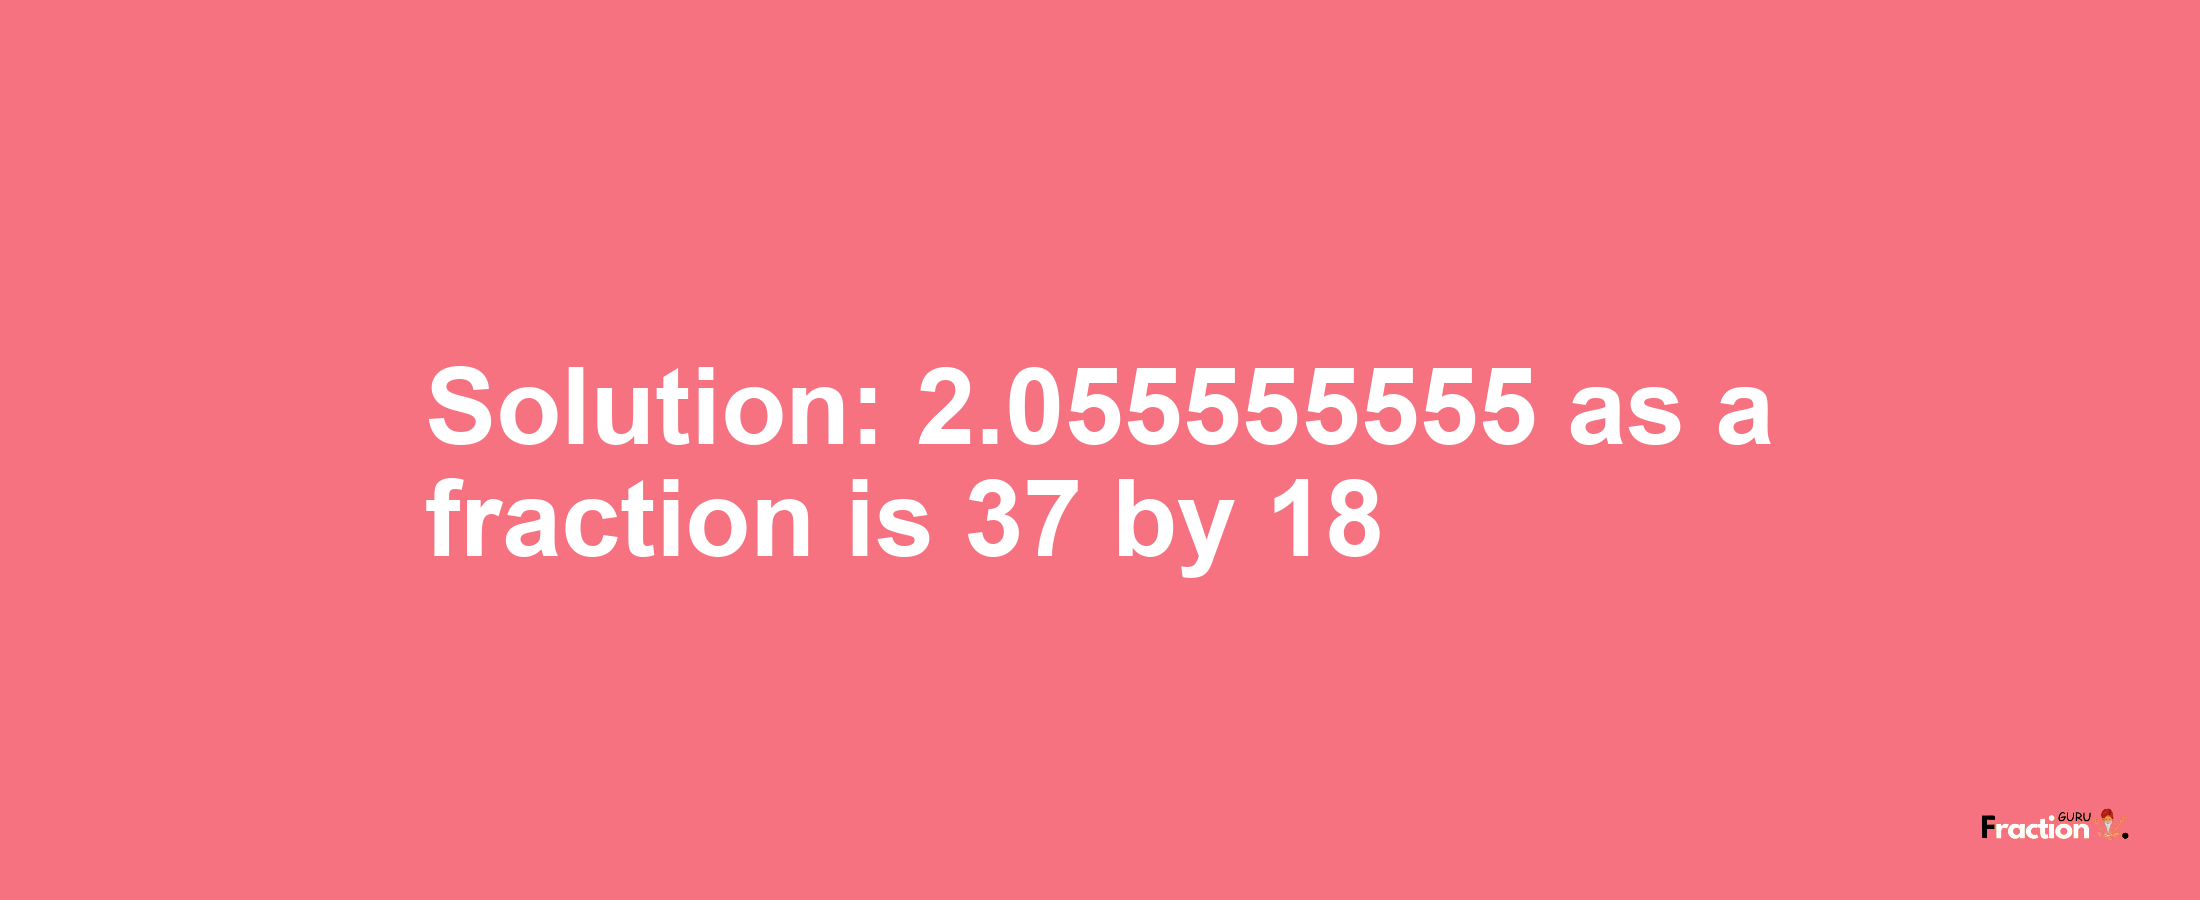 Solution:2.055555555 as a fraction is 37/18